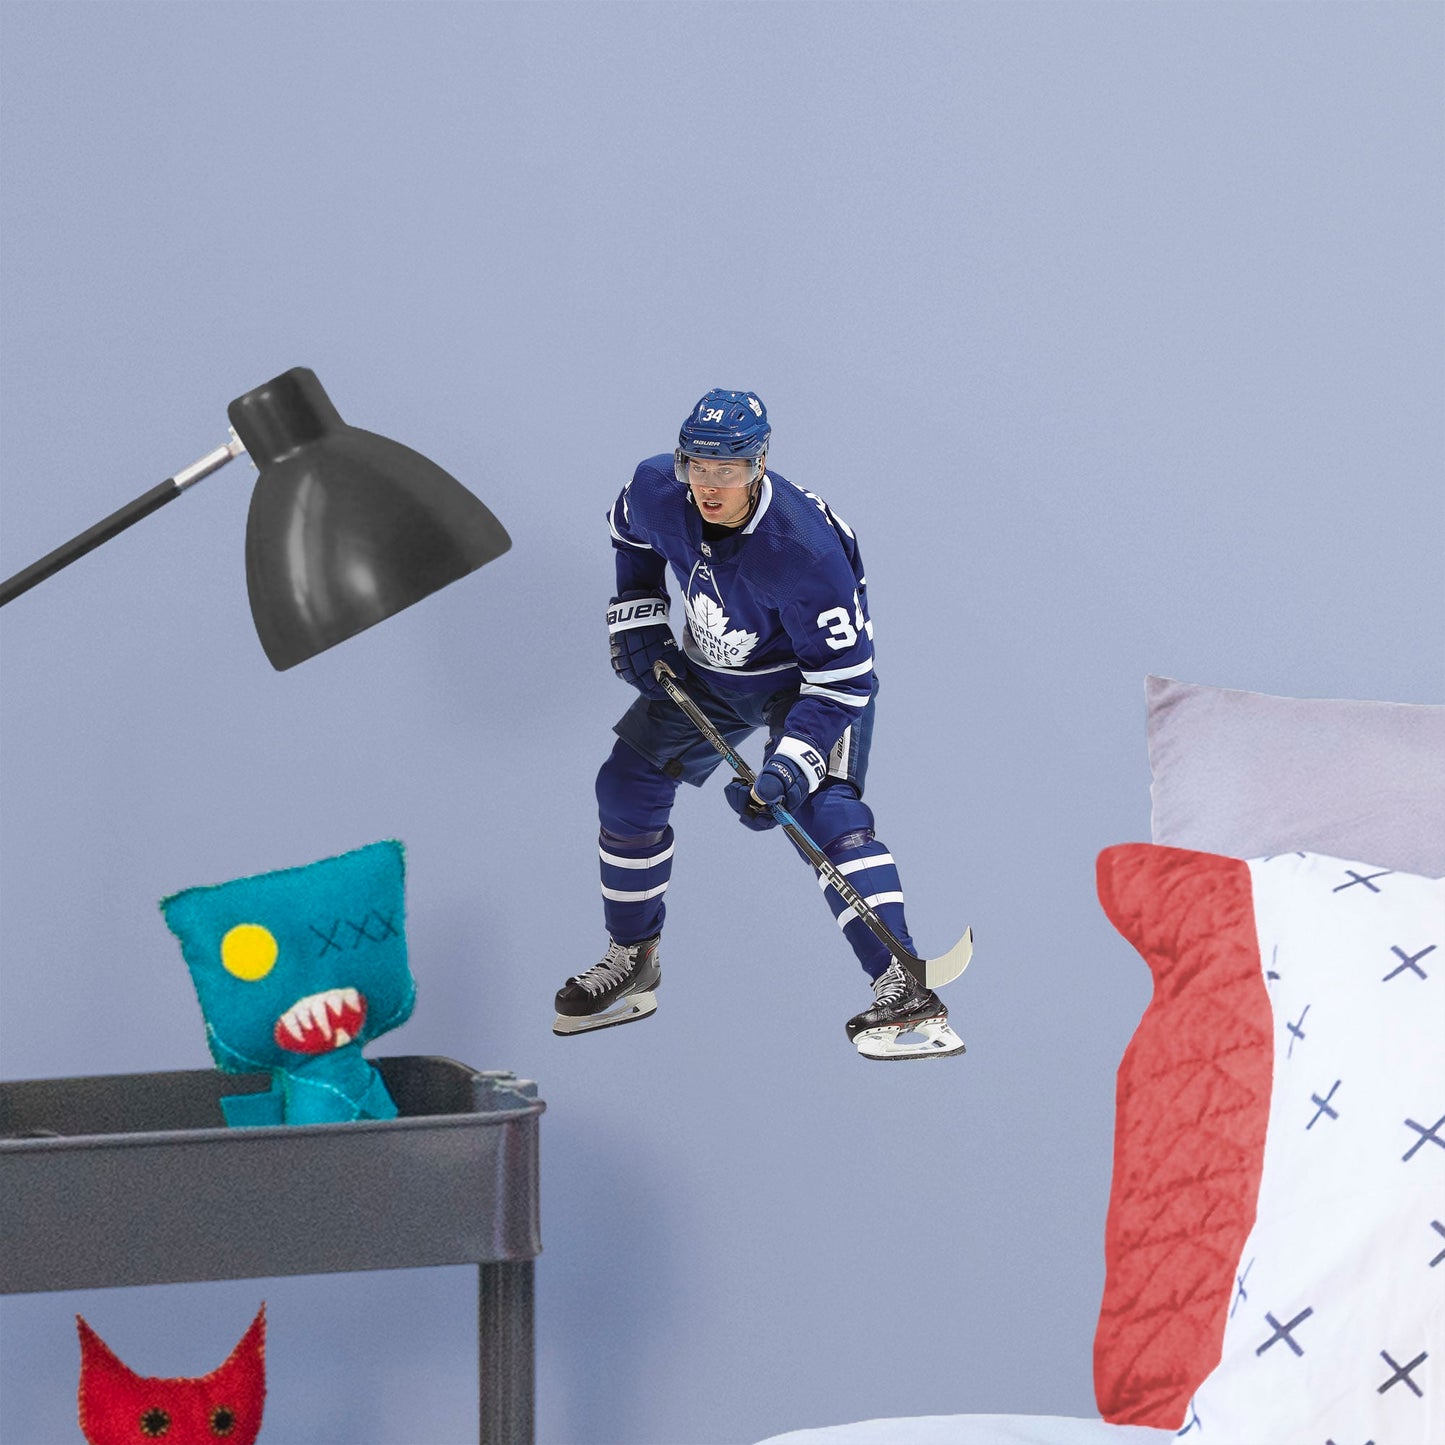 Large Athlete + 2 Decals (10"W x 17"H) He was the first NHL player in modern history to land four goals in his league debut, and now, you can make the Toronto Maple Leafs��� center Auston Matthews part of your bedroom, hallway or game room. Affectionately known as Matty, Austino and Mustache, among other monikers, this durable, tear-resistant NHL wall decal features No. 34 in his navy blue and white Maple Leafs best.